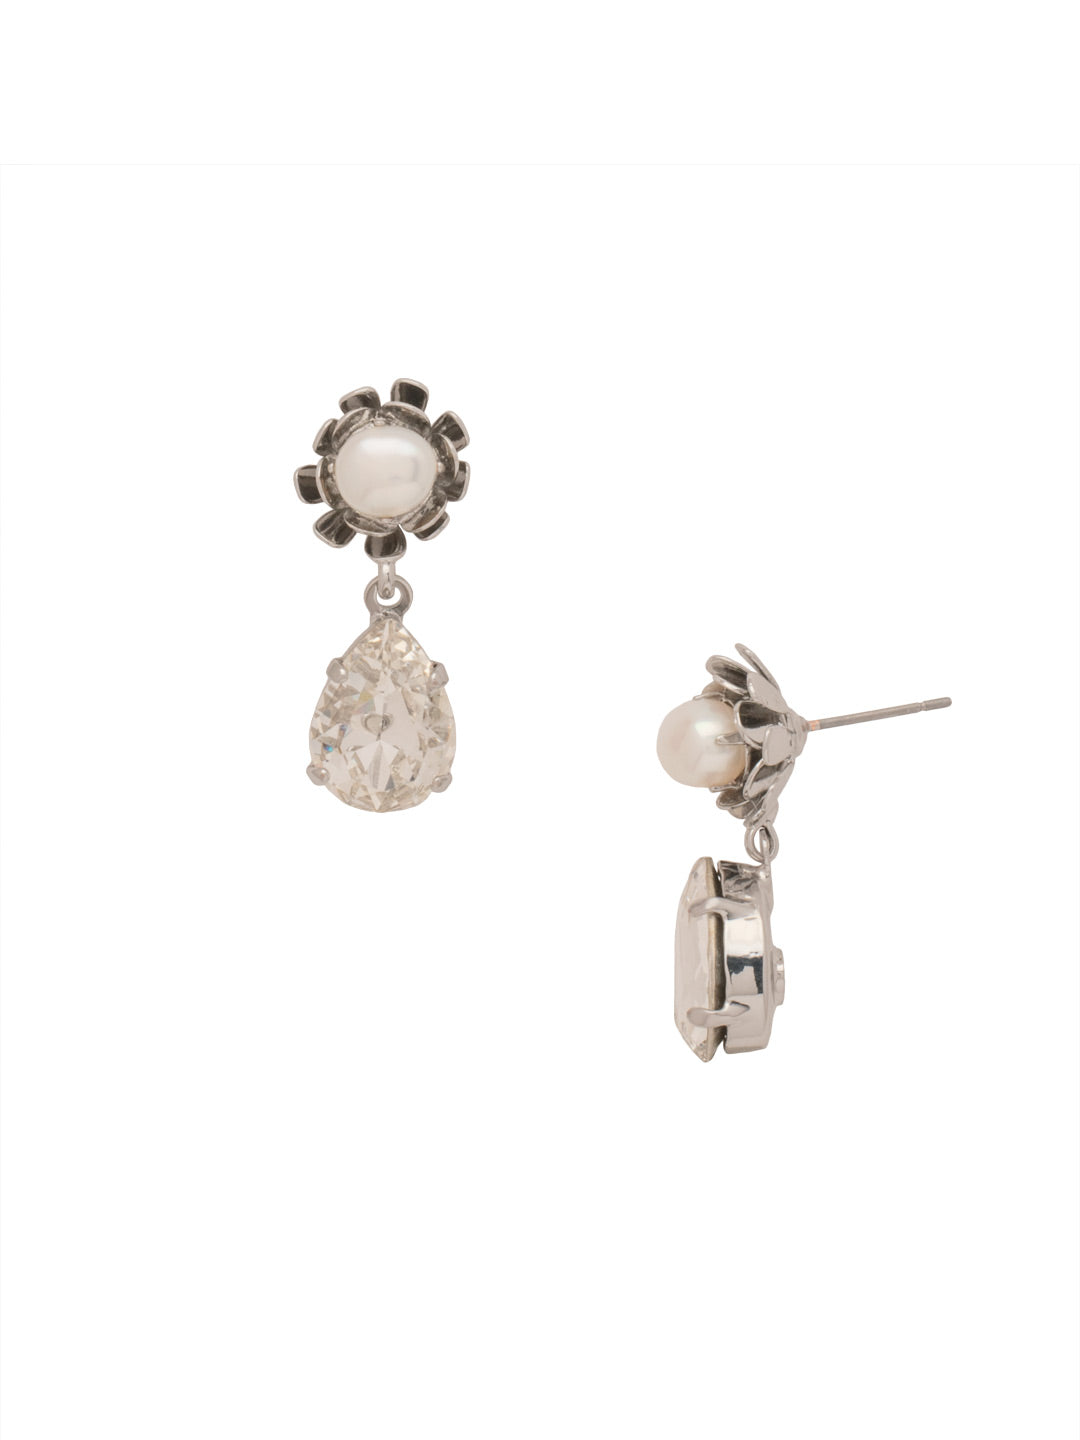 Rosemary Dangle Earrings - EFH12PDMDP - <p>The Rosemary Dangle Earrings feature a single freshwater pearl in a ruffle of metal petals, with a pear cut crystal dangling at the bottom. From Sorrelli's Modern Pearl collection in our Palladium finish.</p>